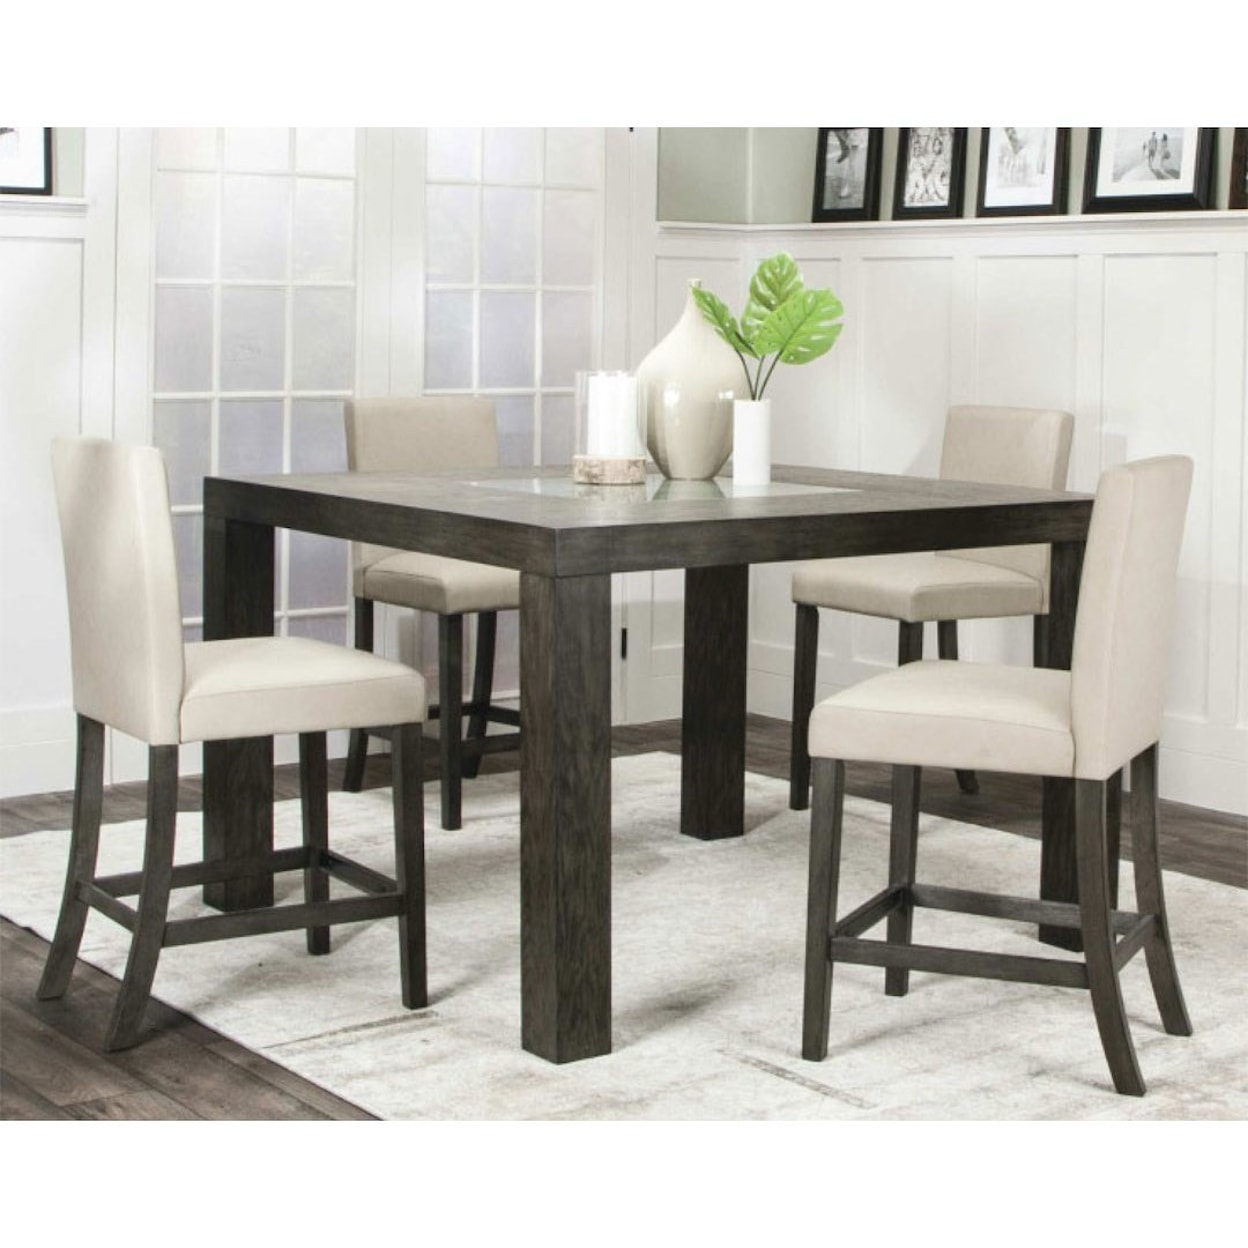 Cramco, Inc Cougar Table, Chair and Dining Bench Set